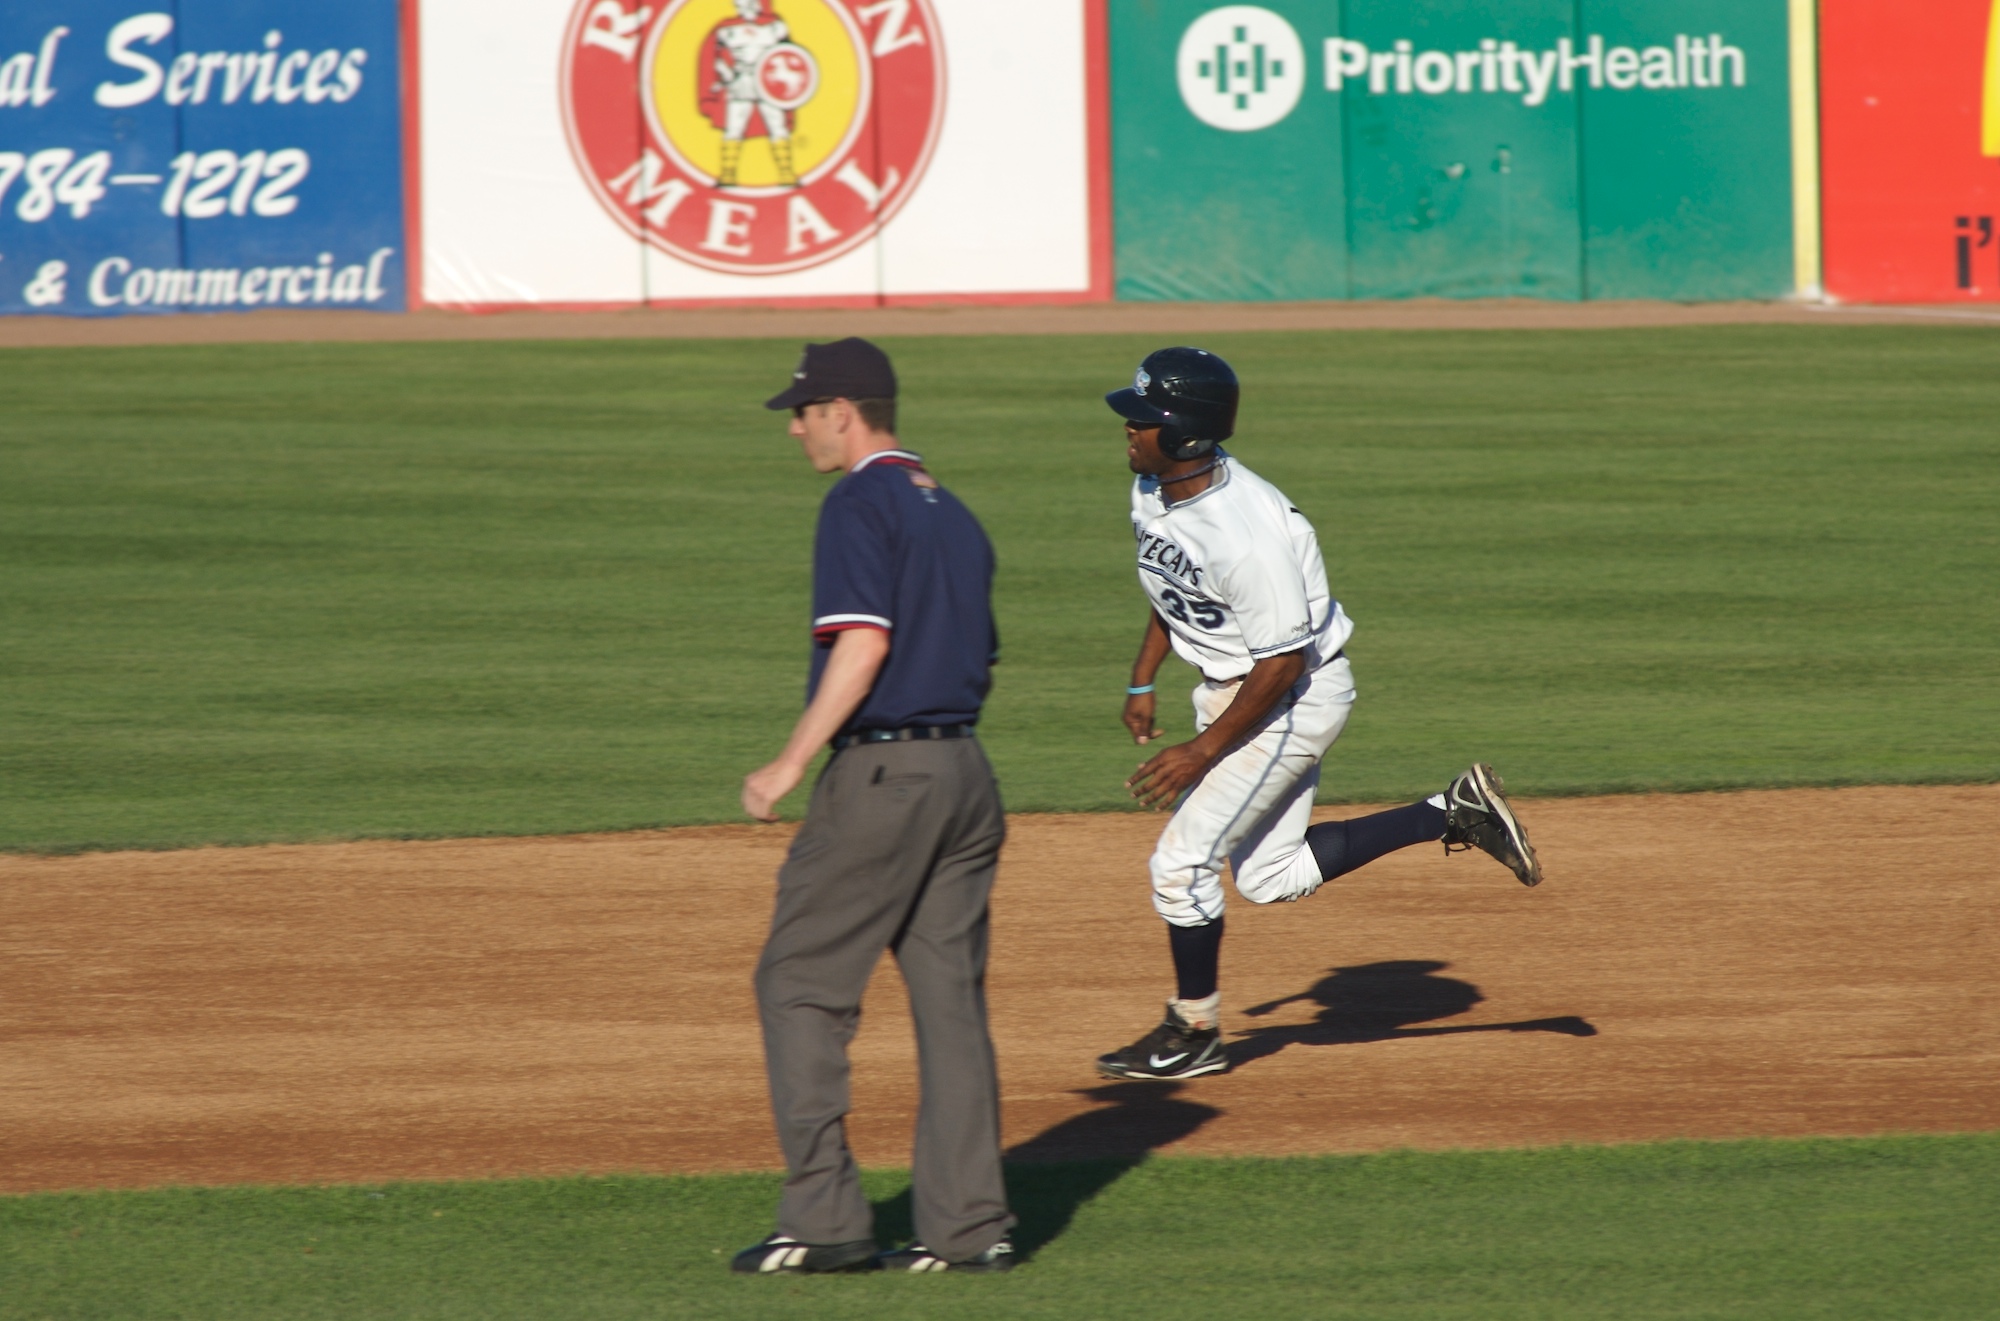 a baseball player running toward the mound near another person